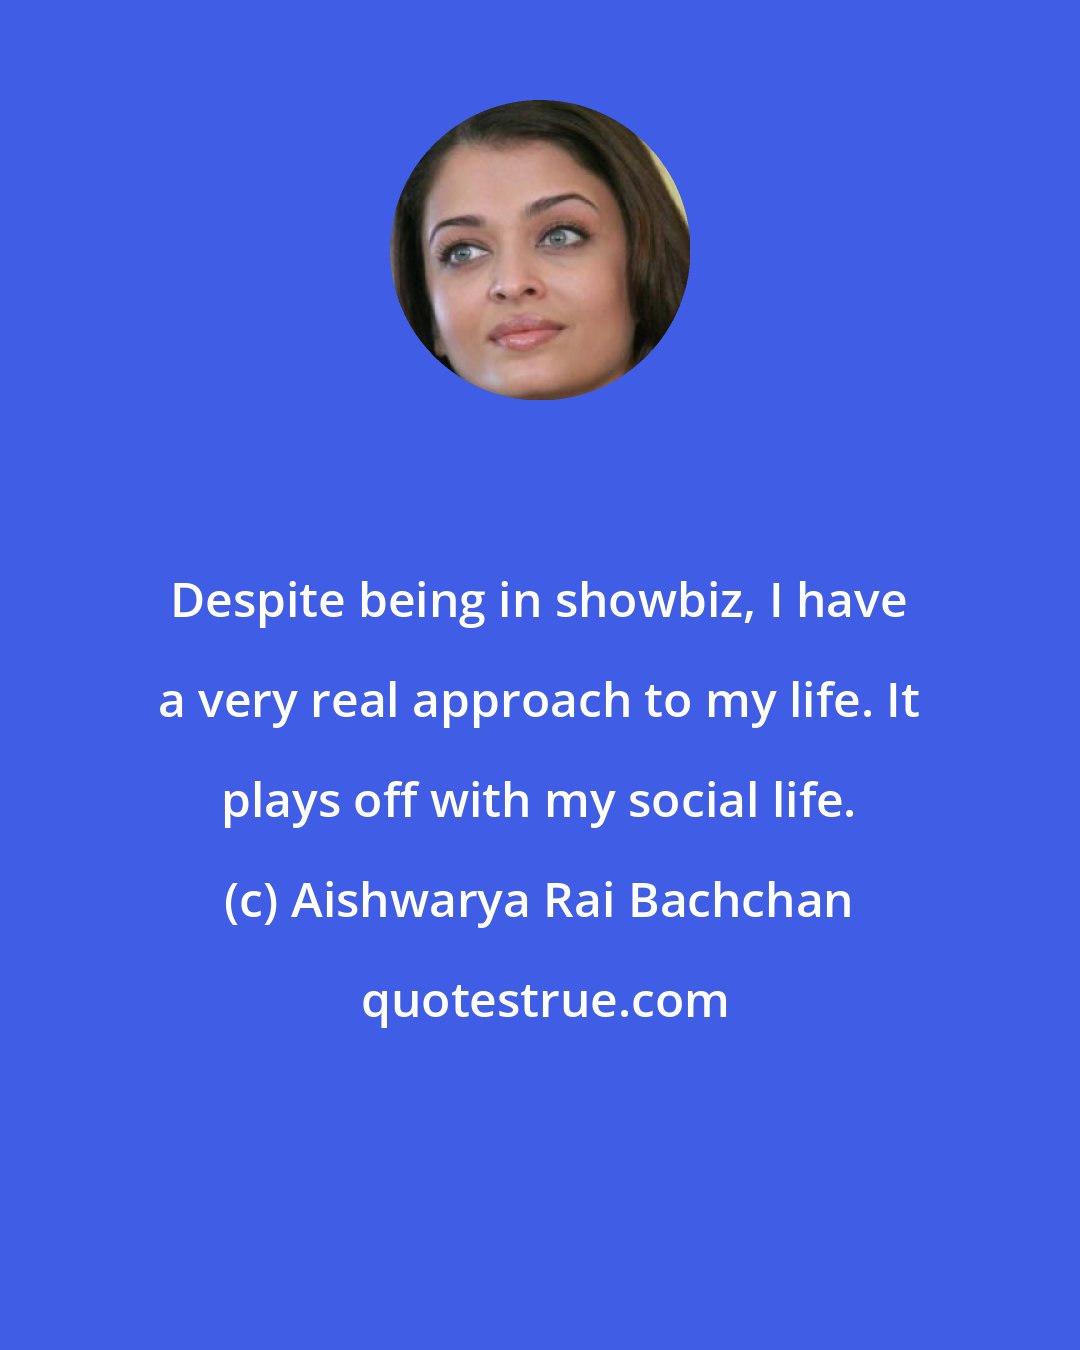 Aishwarya Rai Bachchan: Despite being in showbiz, I have a very real approach to my life. It plays off with my social life.